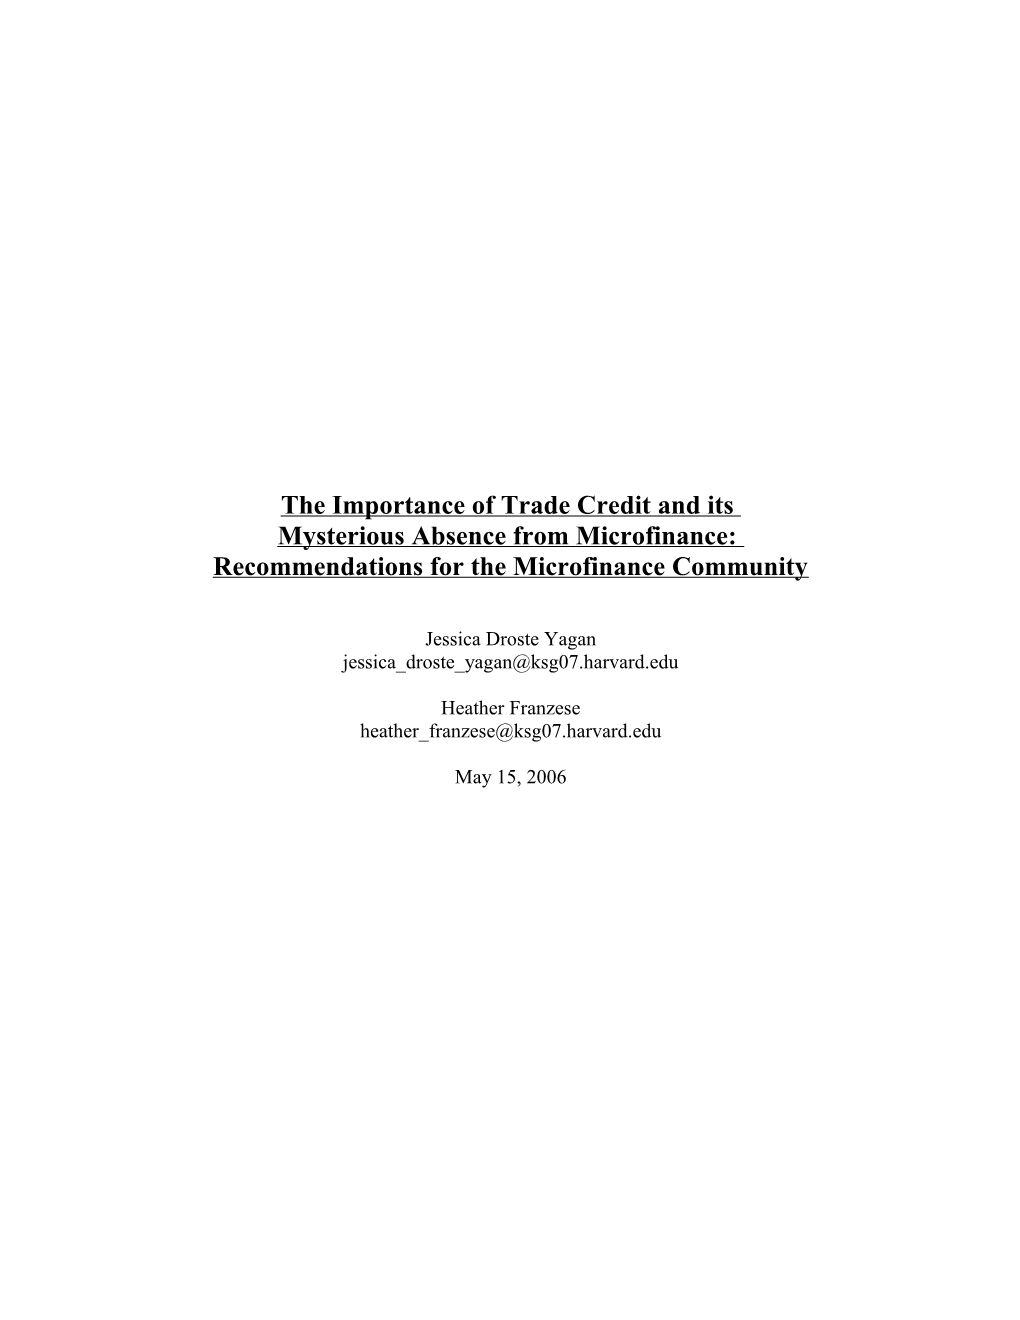 The Importance of Trade Credit and Its